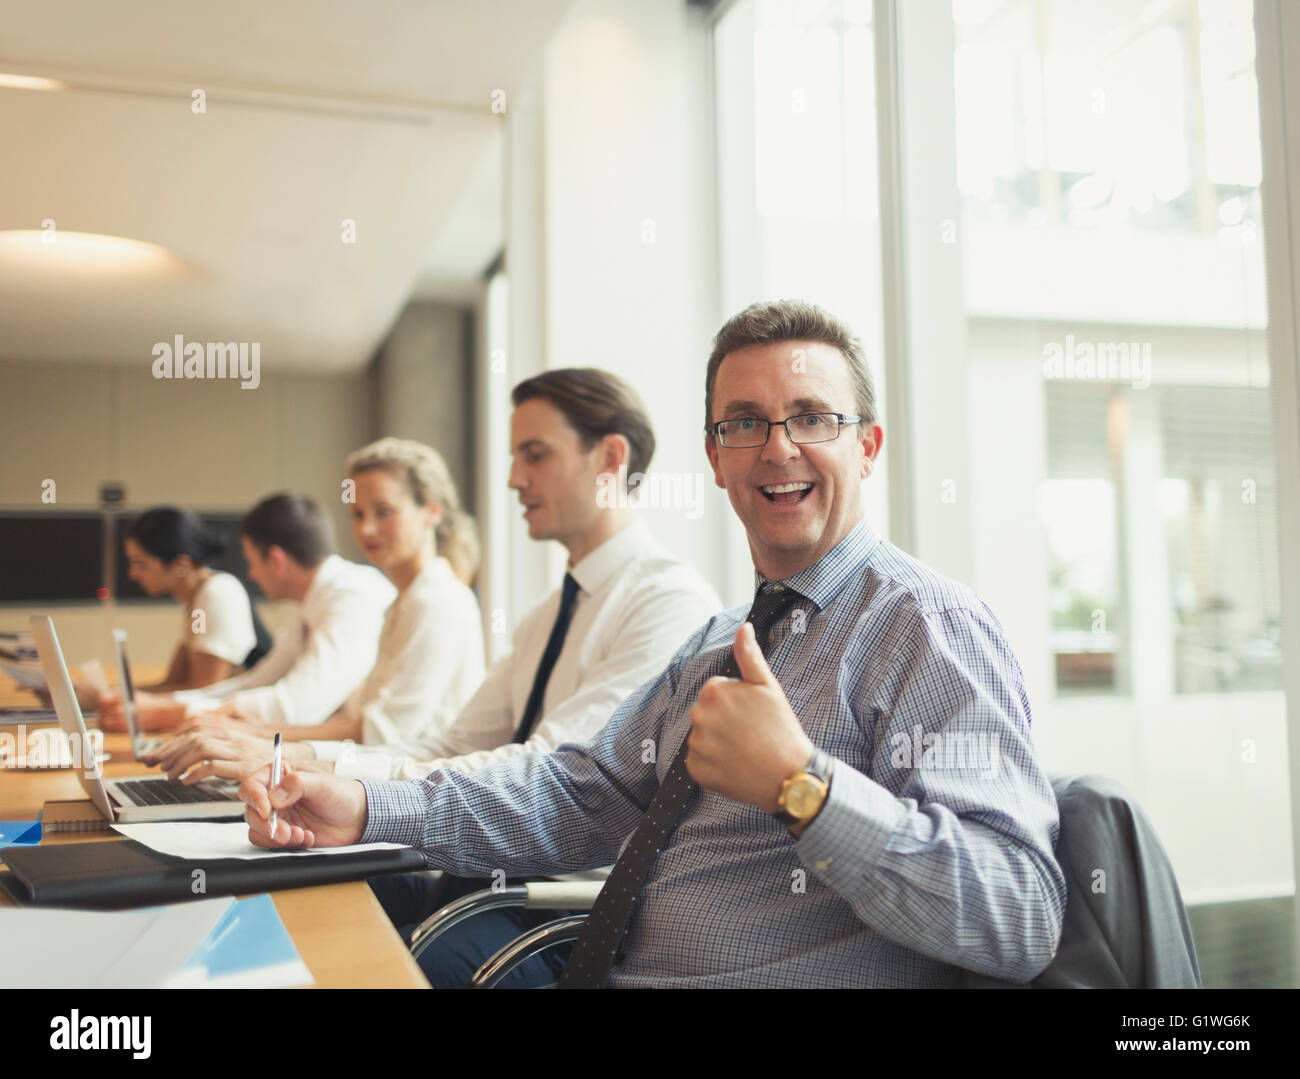 Portrait of confident businessman gesturing thumbs-up in conference room meeting Stock Photo